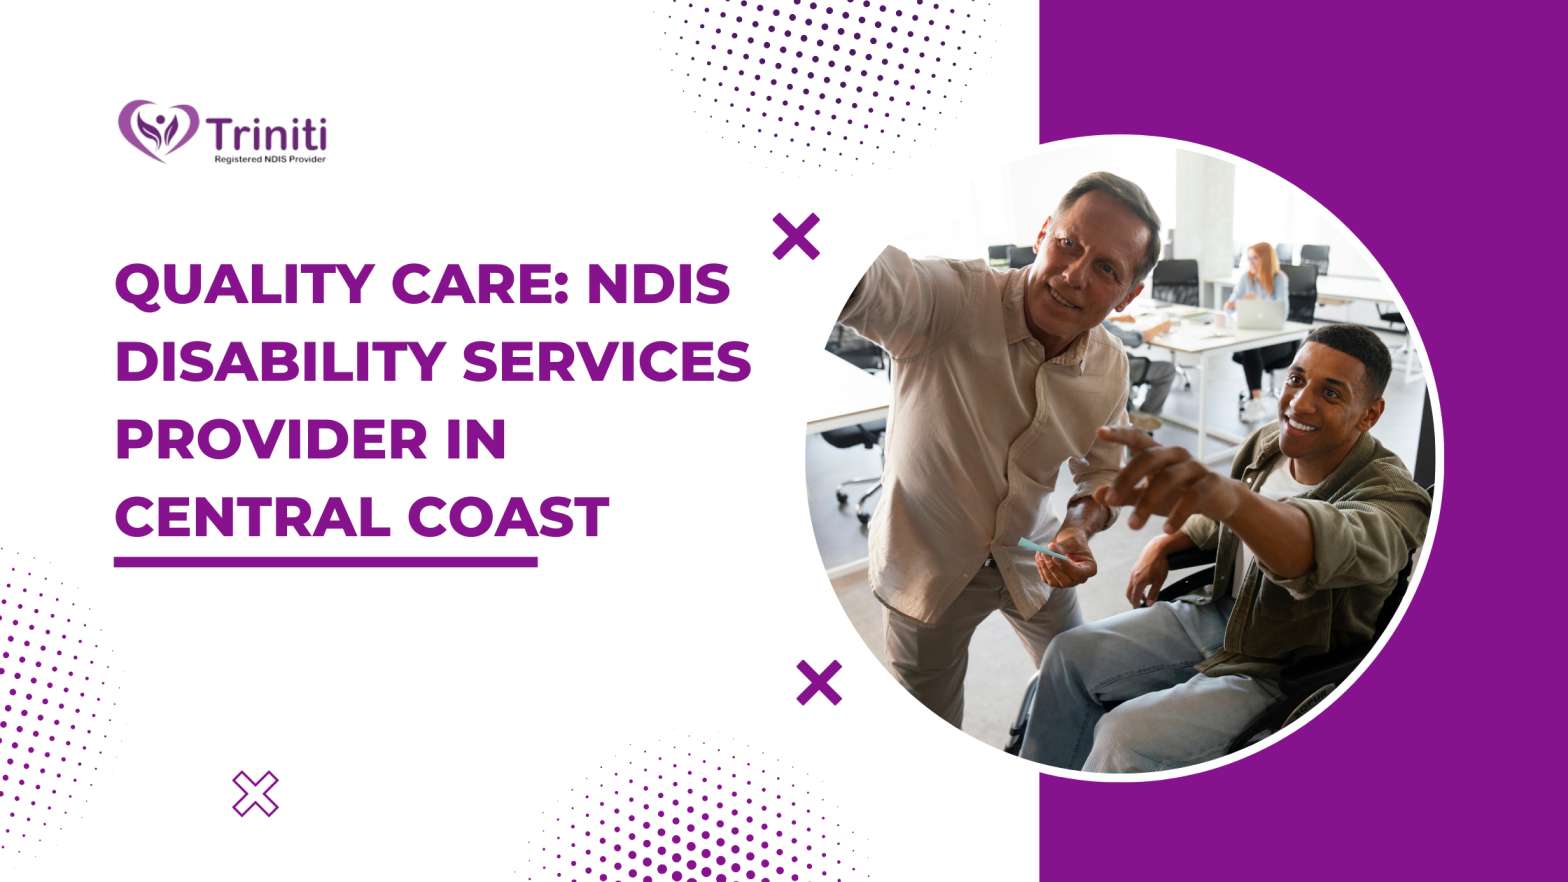 Quality Care: NDIS Disability Services Provider in Central Coast